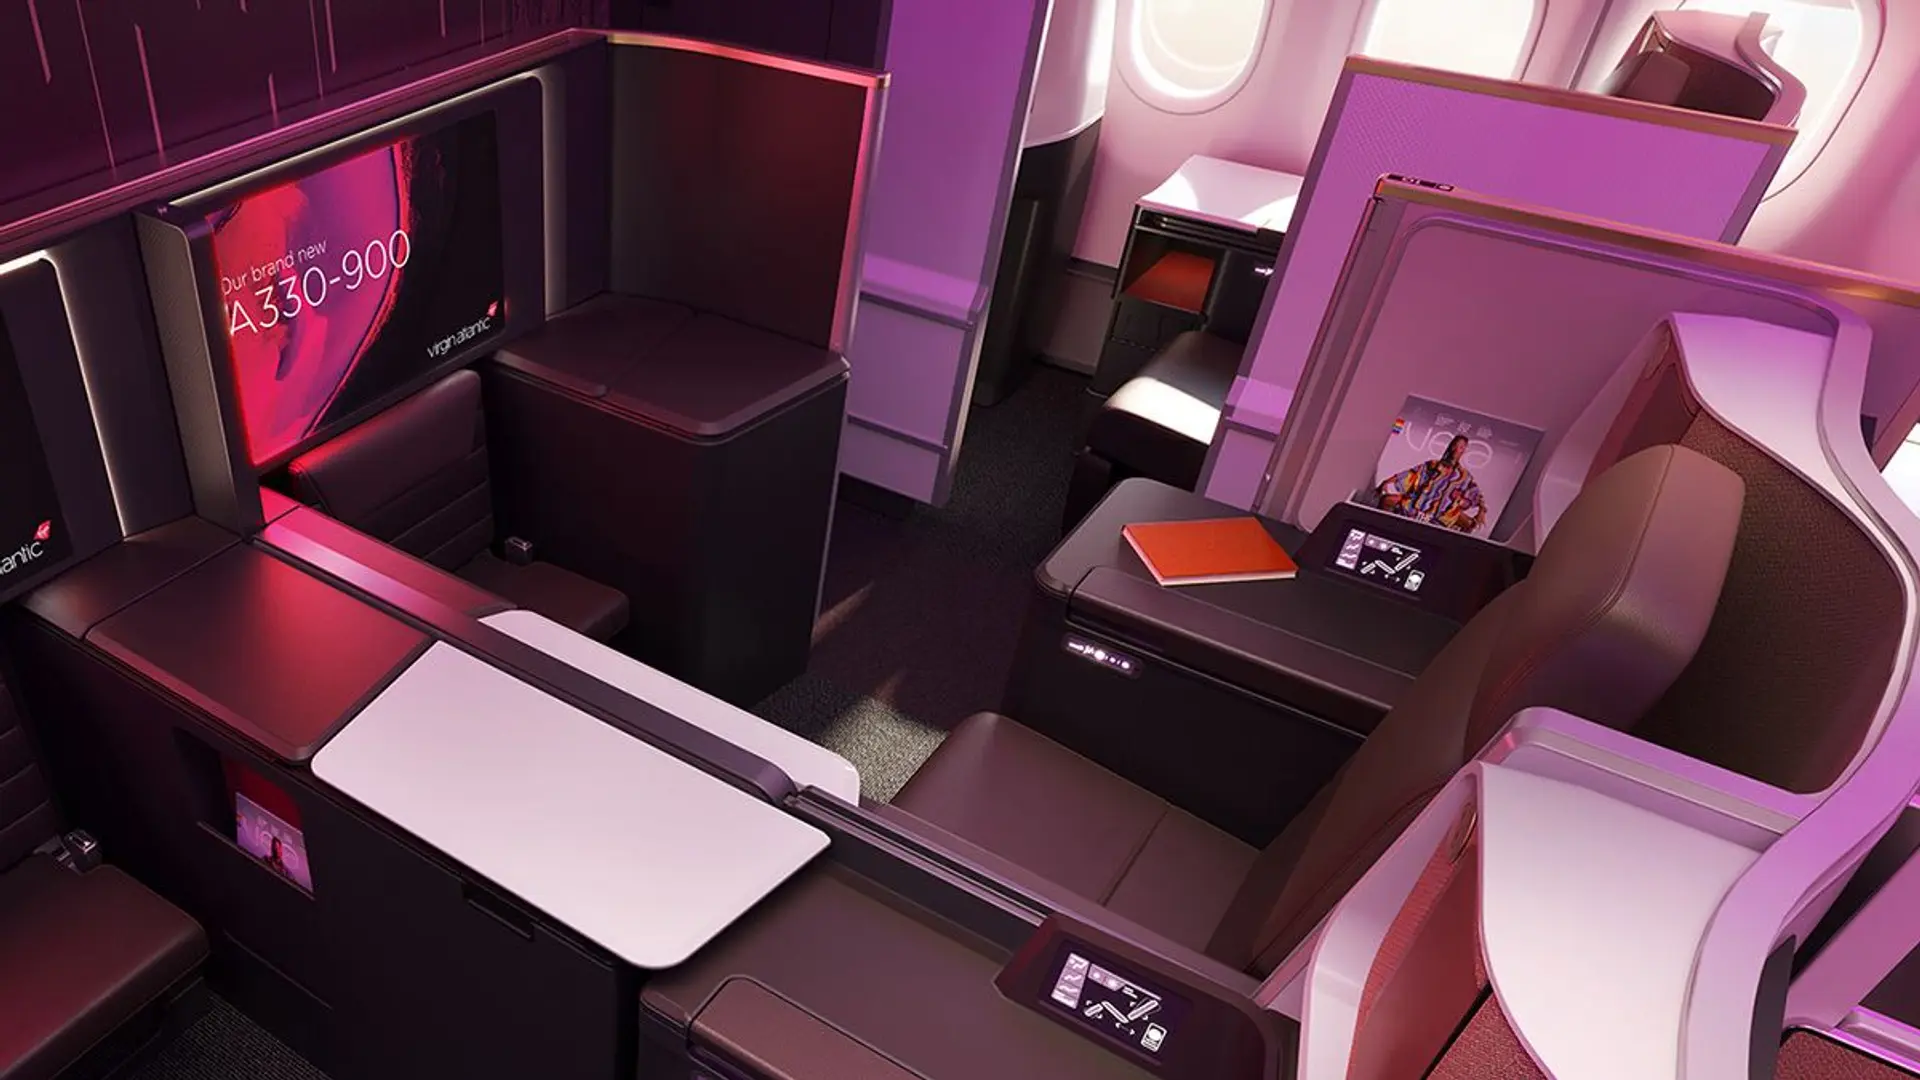 Airlines News - Virgin Atlantic unveils New Airbus A330neo fleet with stunning new Upper Class Retreat Suites